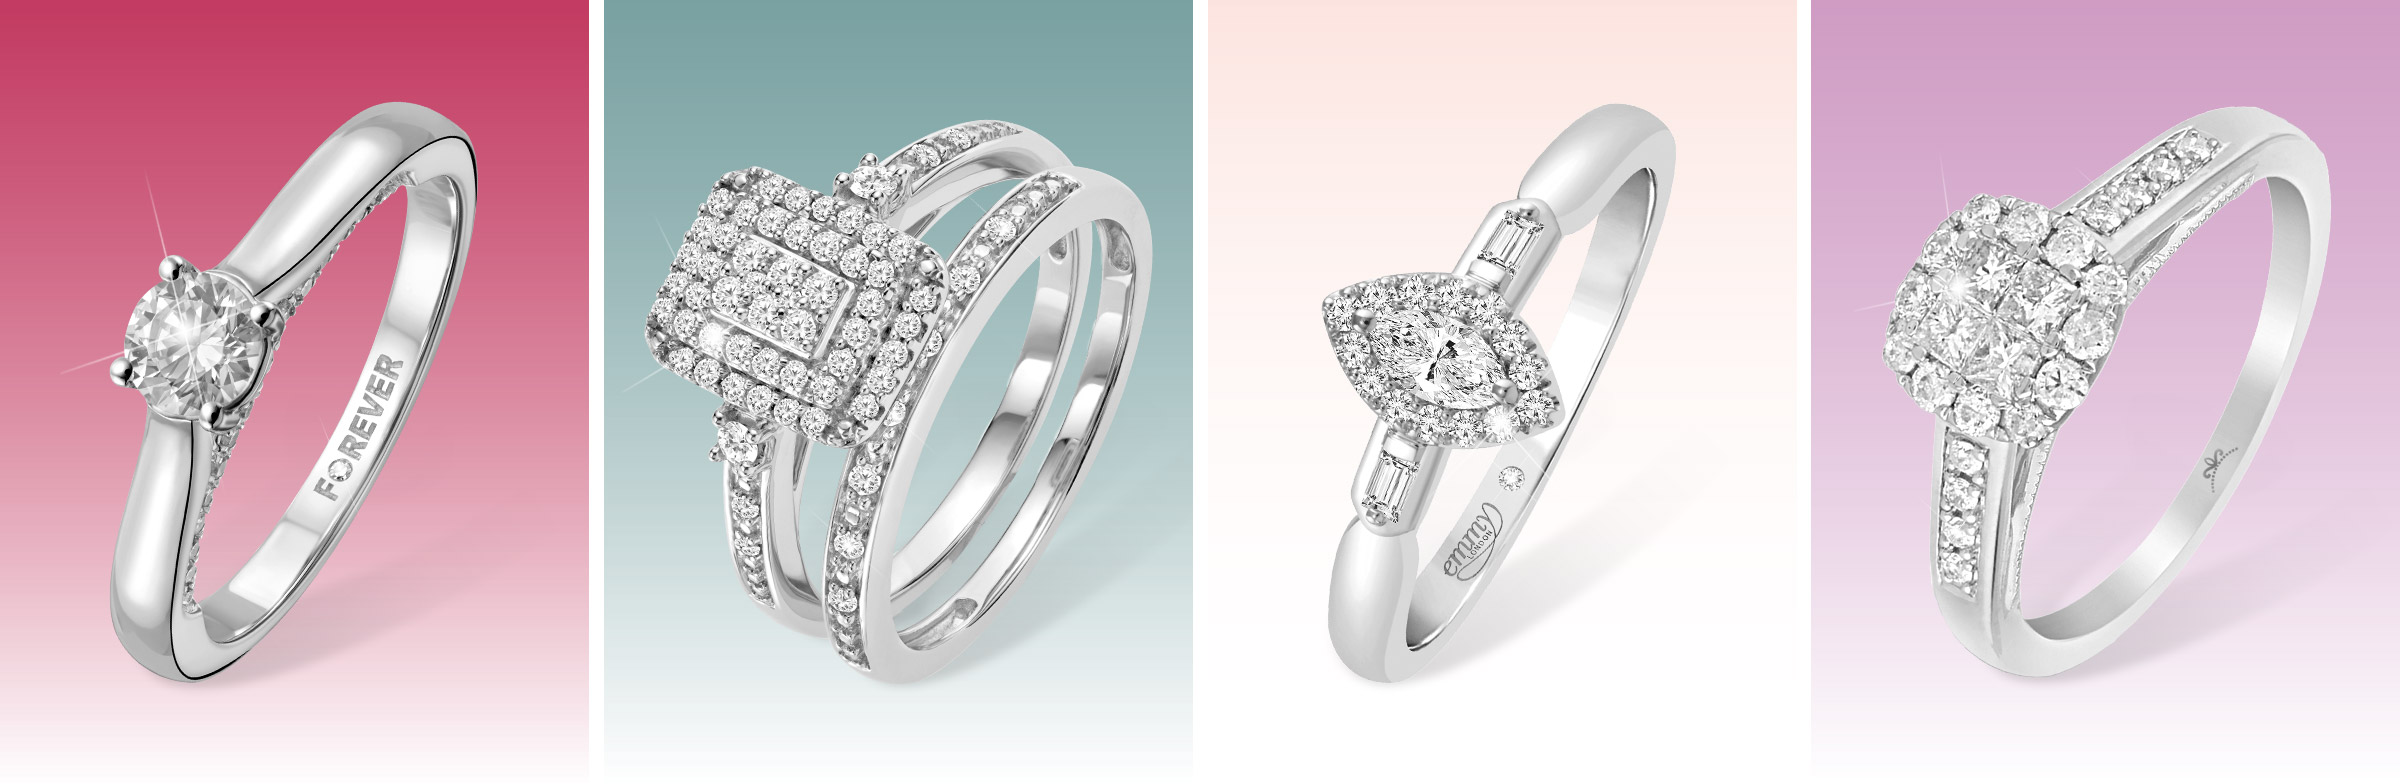 PPT - Designing Your Own Engagement Ring on your Budget_SkydellDesignLLC  PowerPoint Presentation - ID:11412856